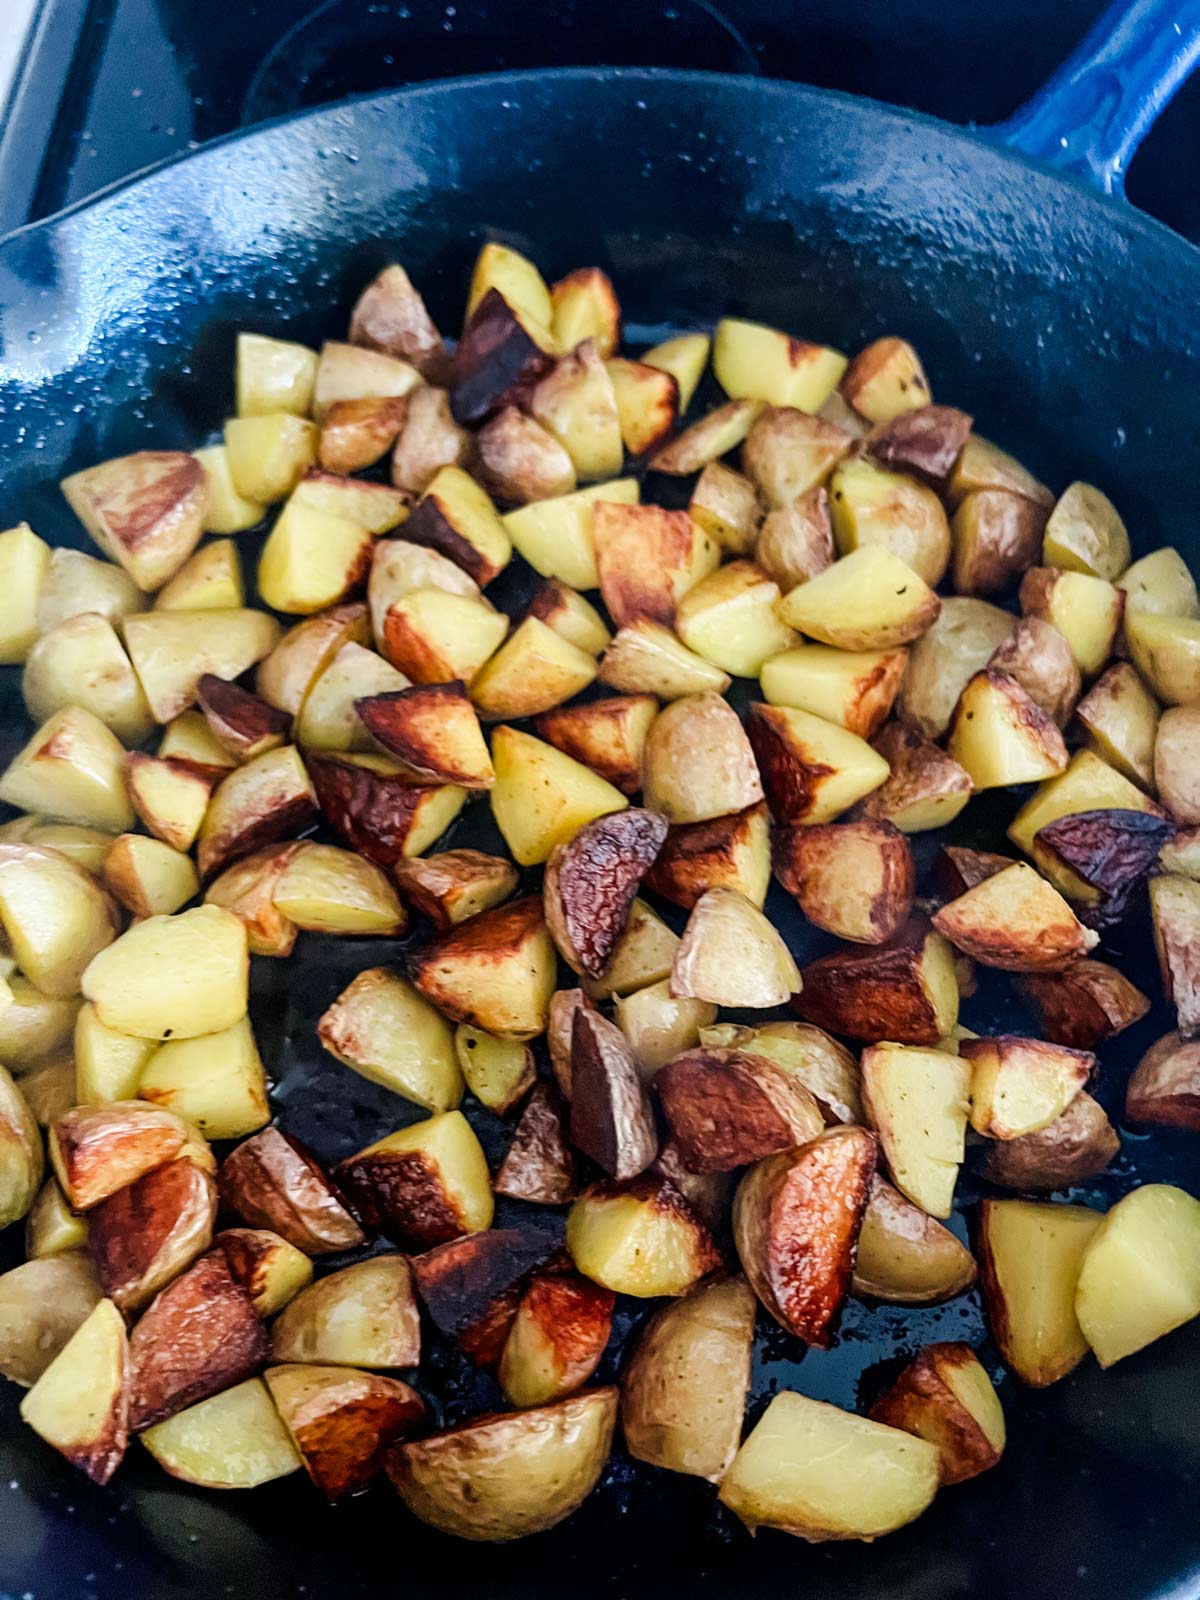 Skillet potatoes in a cast iron skillet that have started to get golden brown.